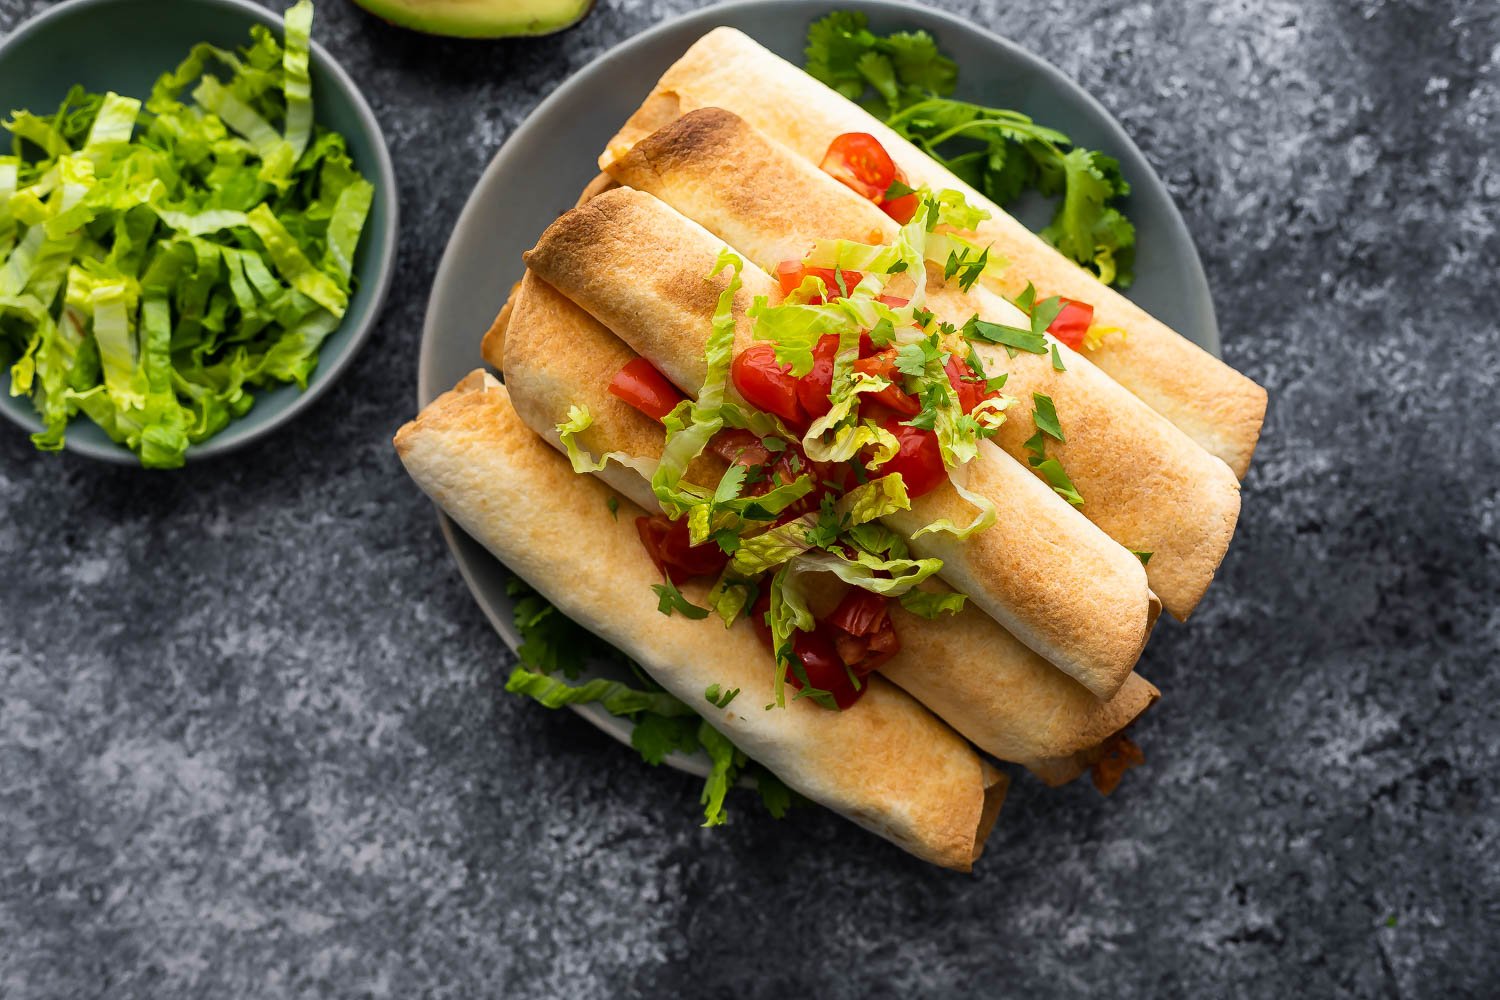 cooked taquitos stacked on a plate, topped with lettuce and tomatoes